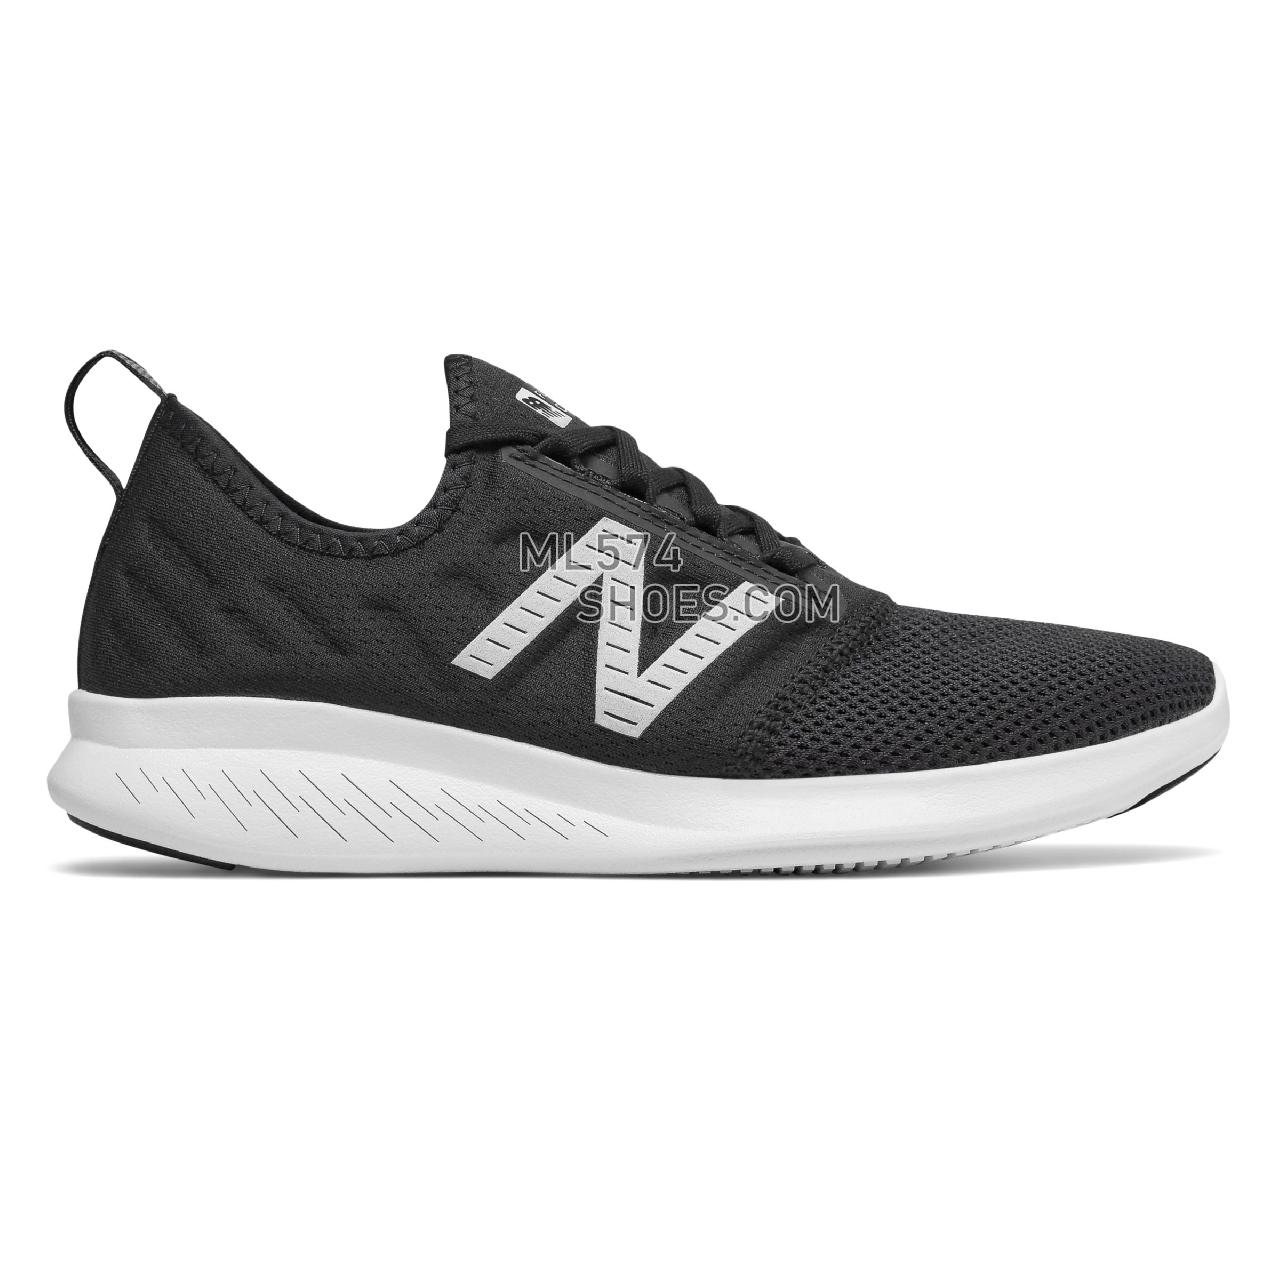 New Balance FuelCore Coast v4 - Women's 4 - Running Black with Outerspace - WCSTLLK4